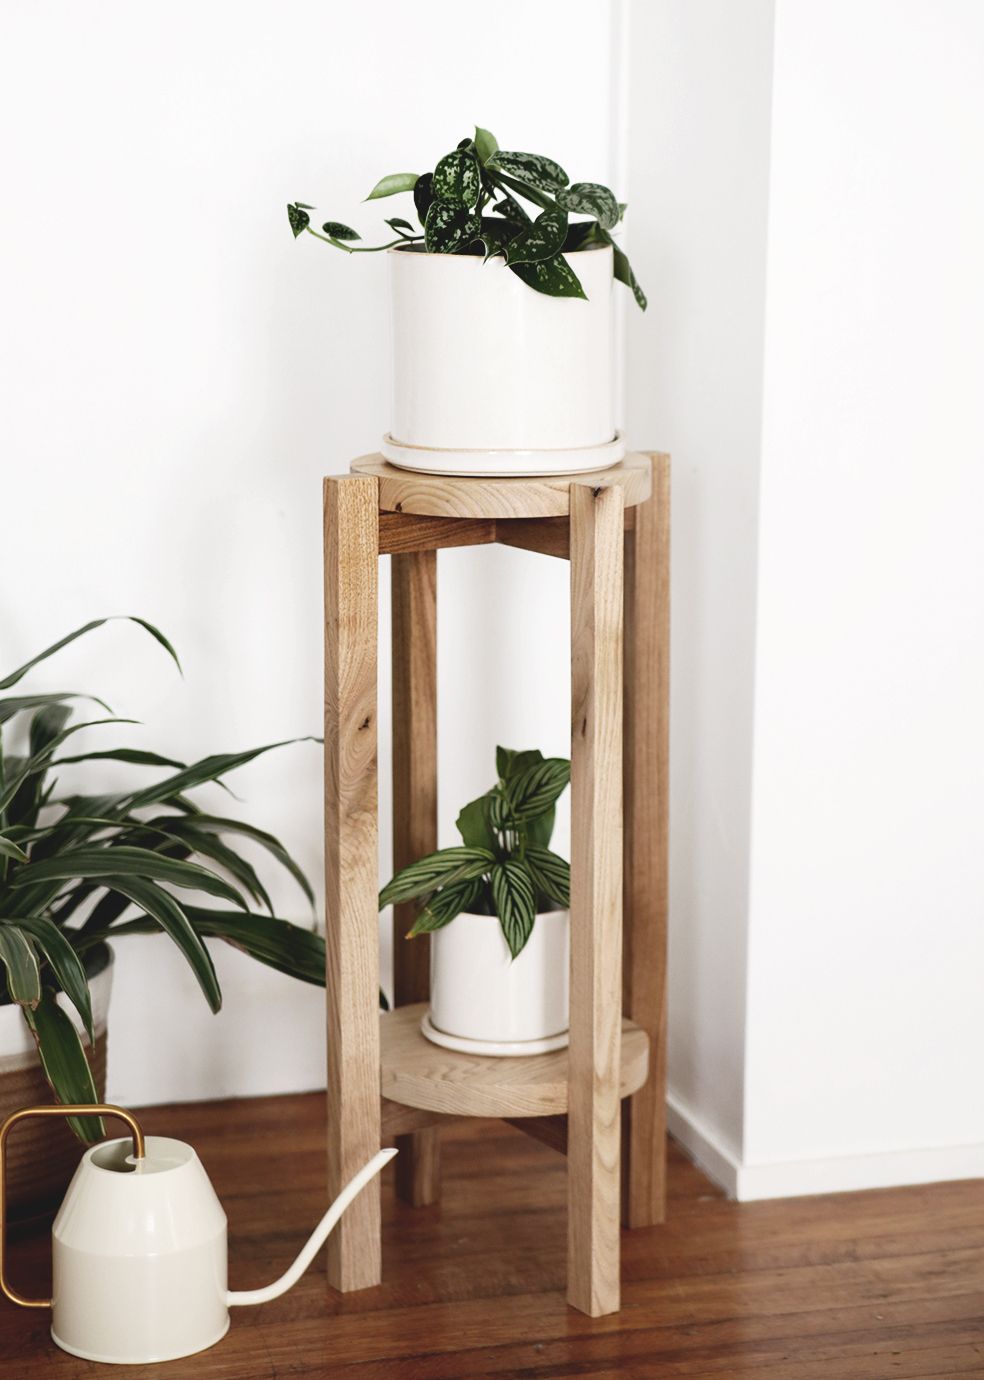 Wood Plant Stands Within Well Liked Diy Wood Plant Stand – A Simple Diy With A Video Tutorial (View 3 of 10)